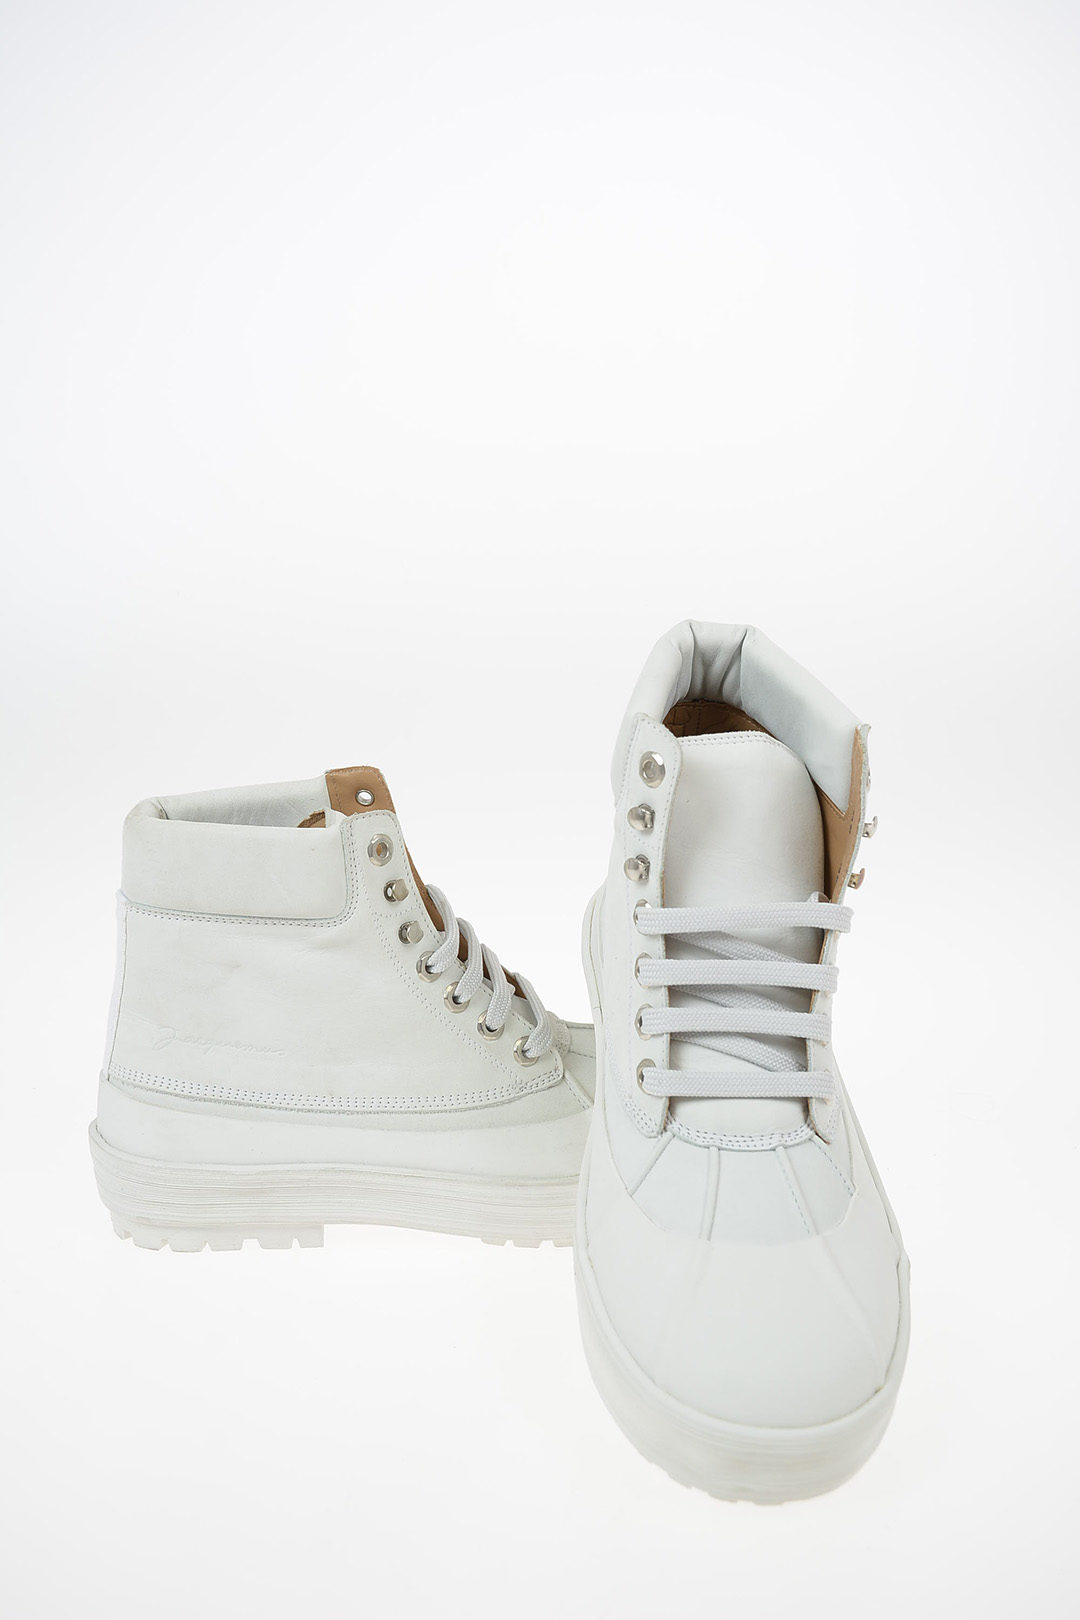 Jacquemus Les Meuniers Leather Lace-up Shoes in White for Men Mens Lace-ups 